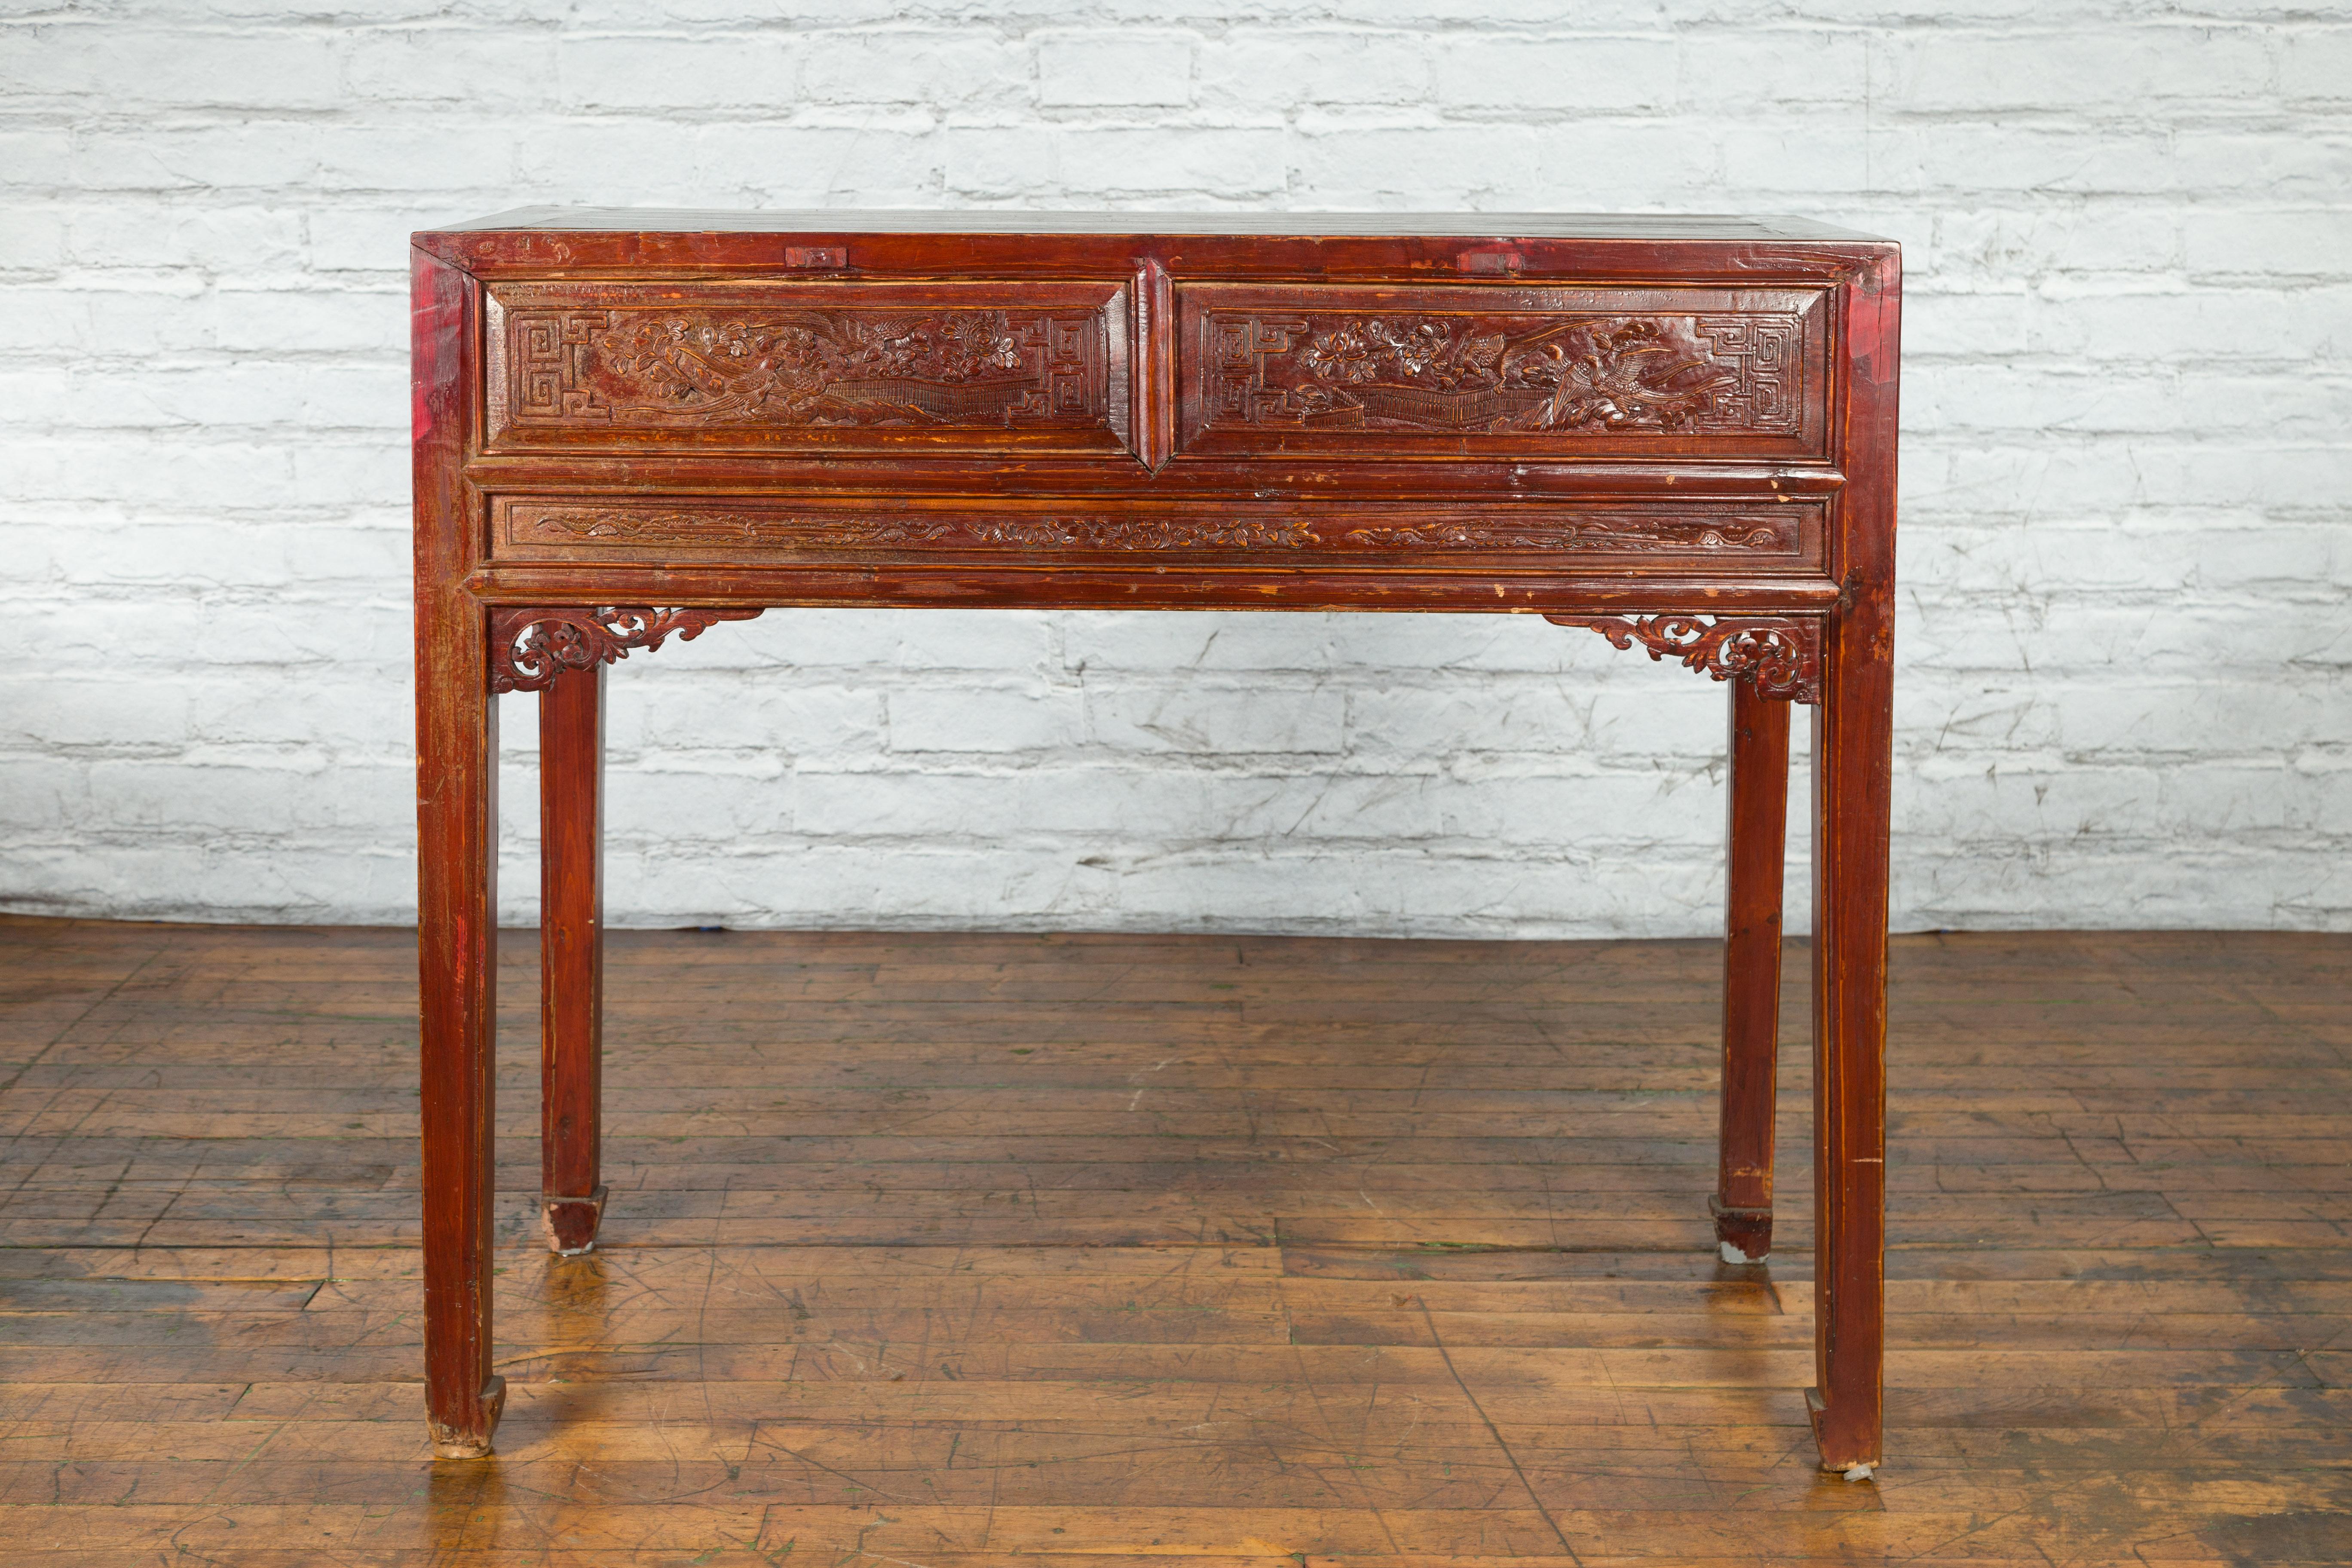 Chinese Qing Dynasty Period 19th Century Reddish Brown Table with Two Drawers For Sale 12